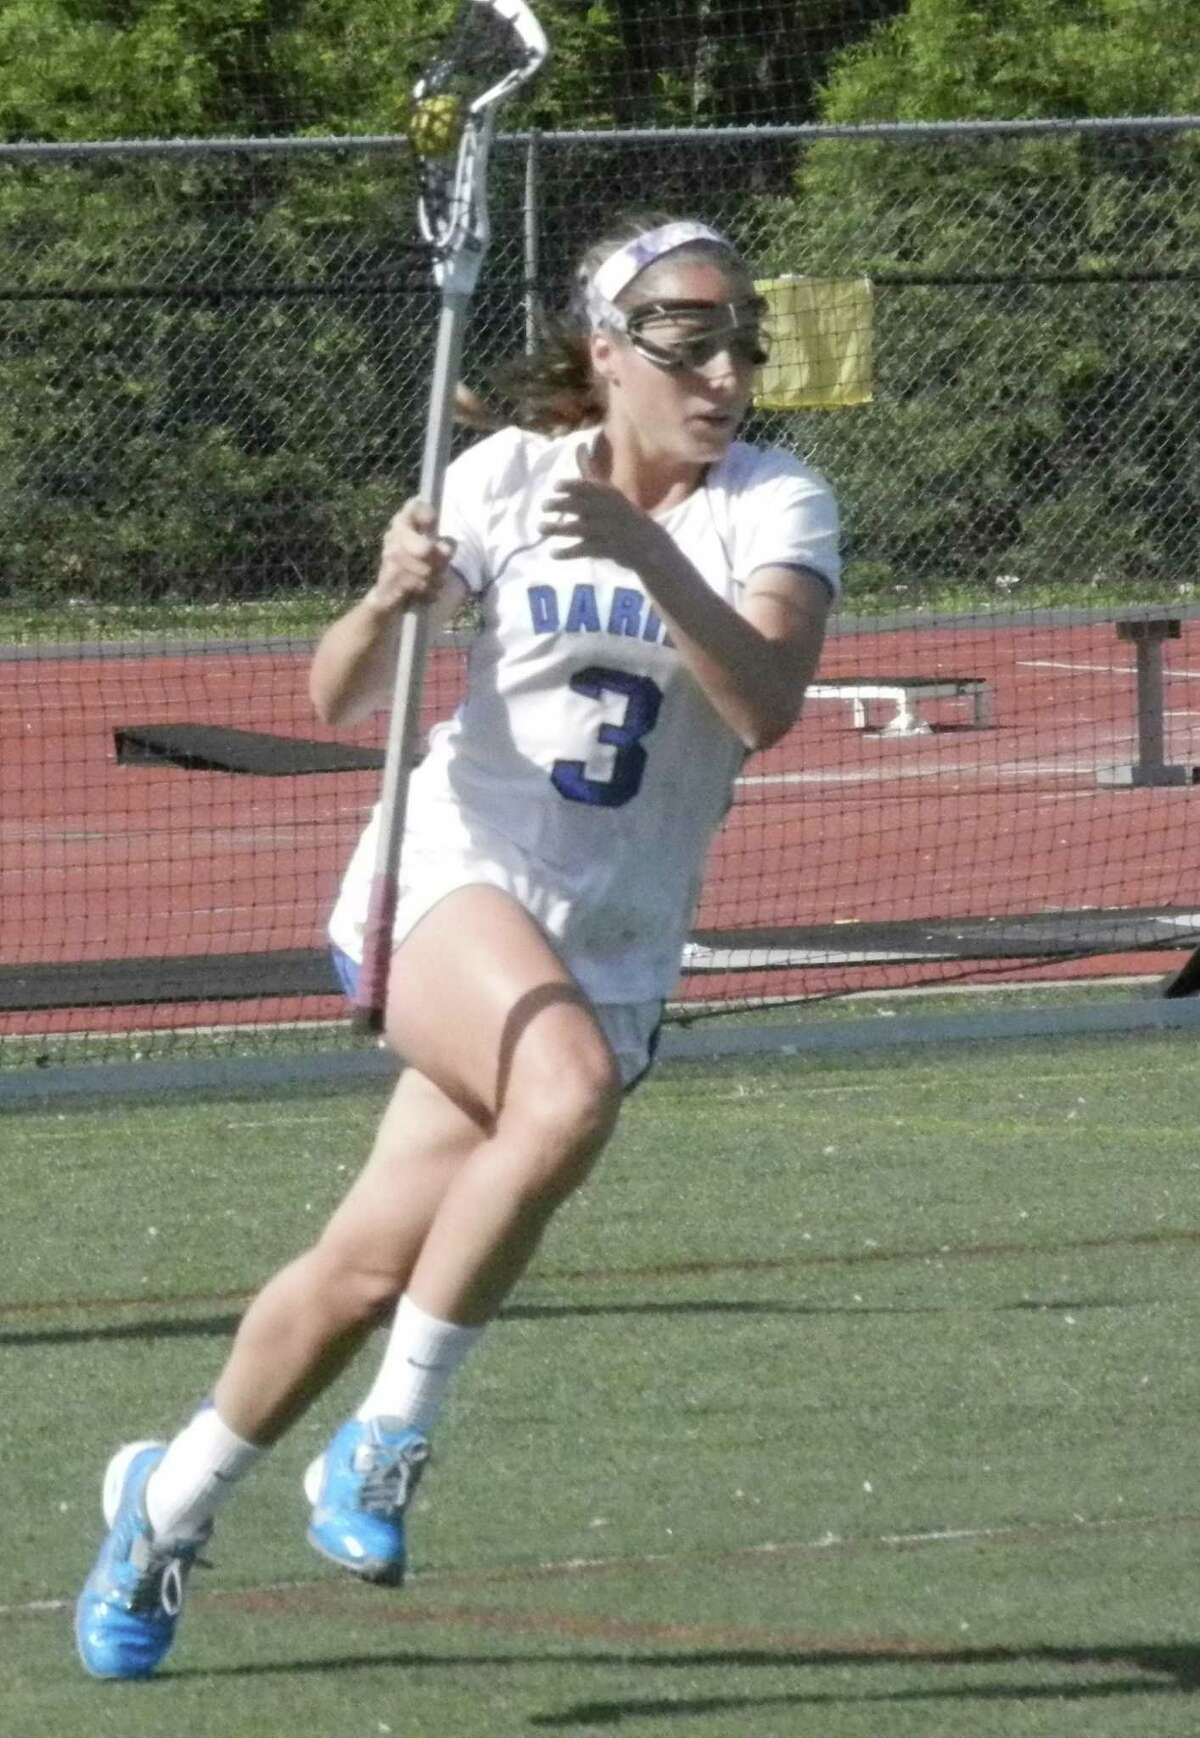 Darien senior Dillon Schoen (3) races upfield against Fairfield Ludlowe in an FCIAC girls lacrosse game on Tuesday, May 20 in Darien. The Blue Wave defeated the Falcons 18-5. Schoen contributed with two goals and one assist.